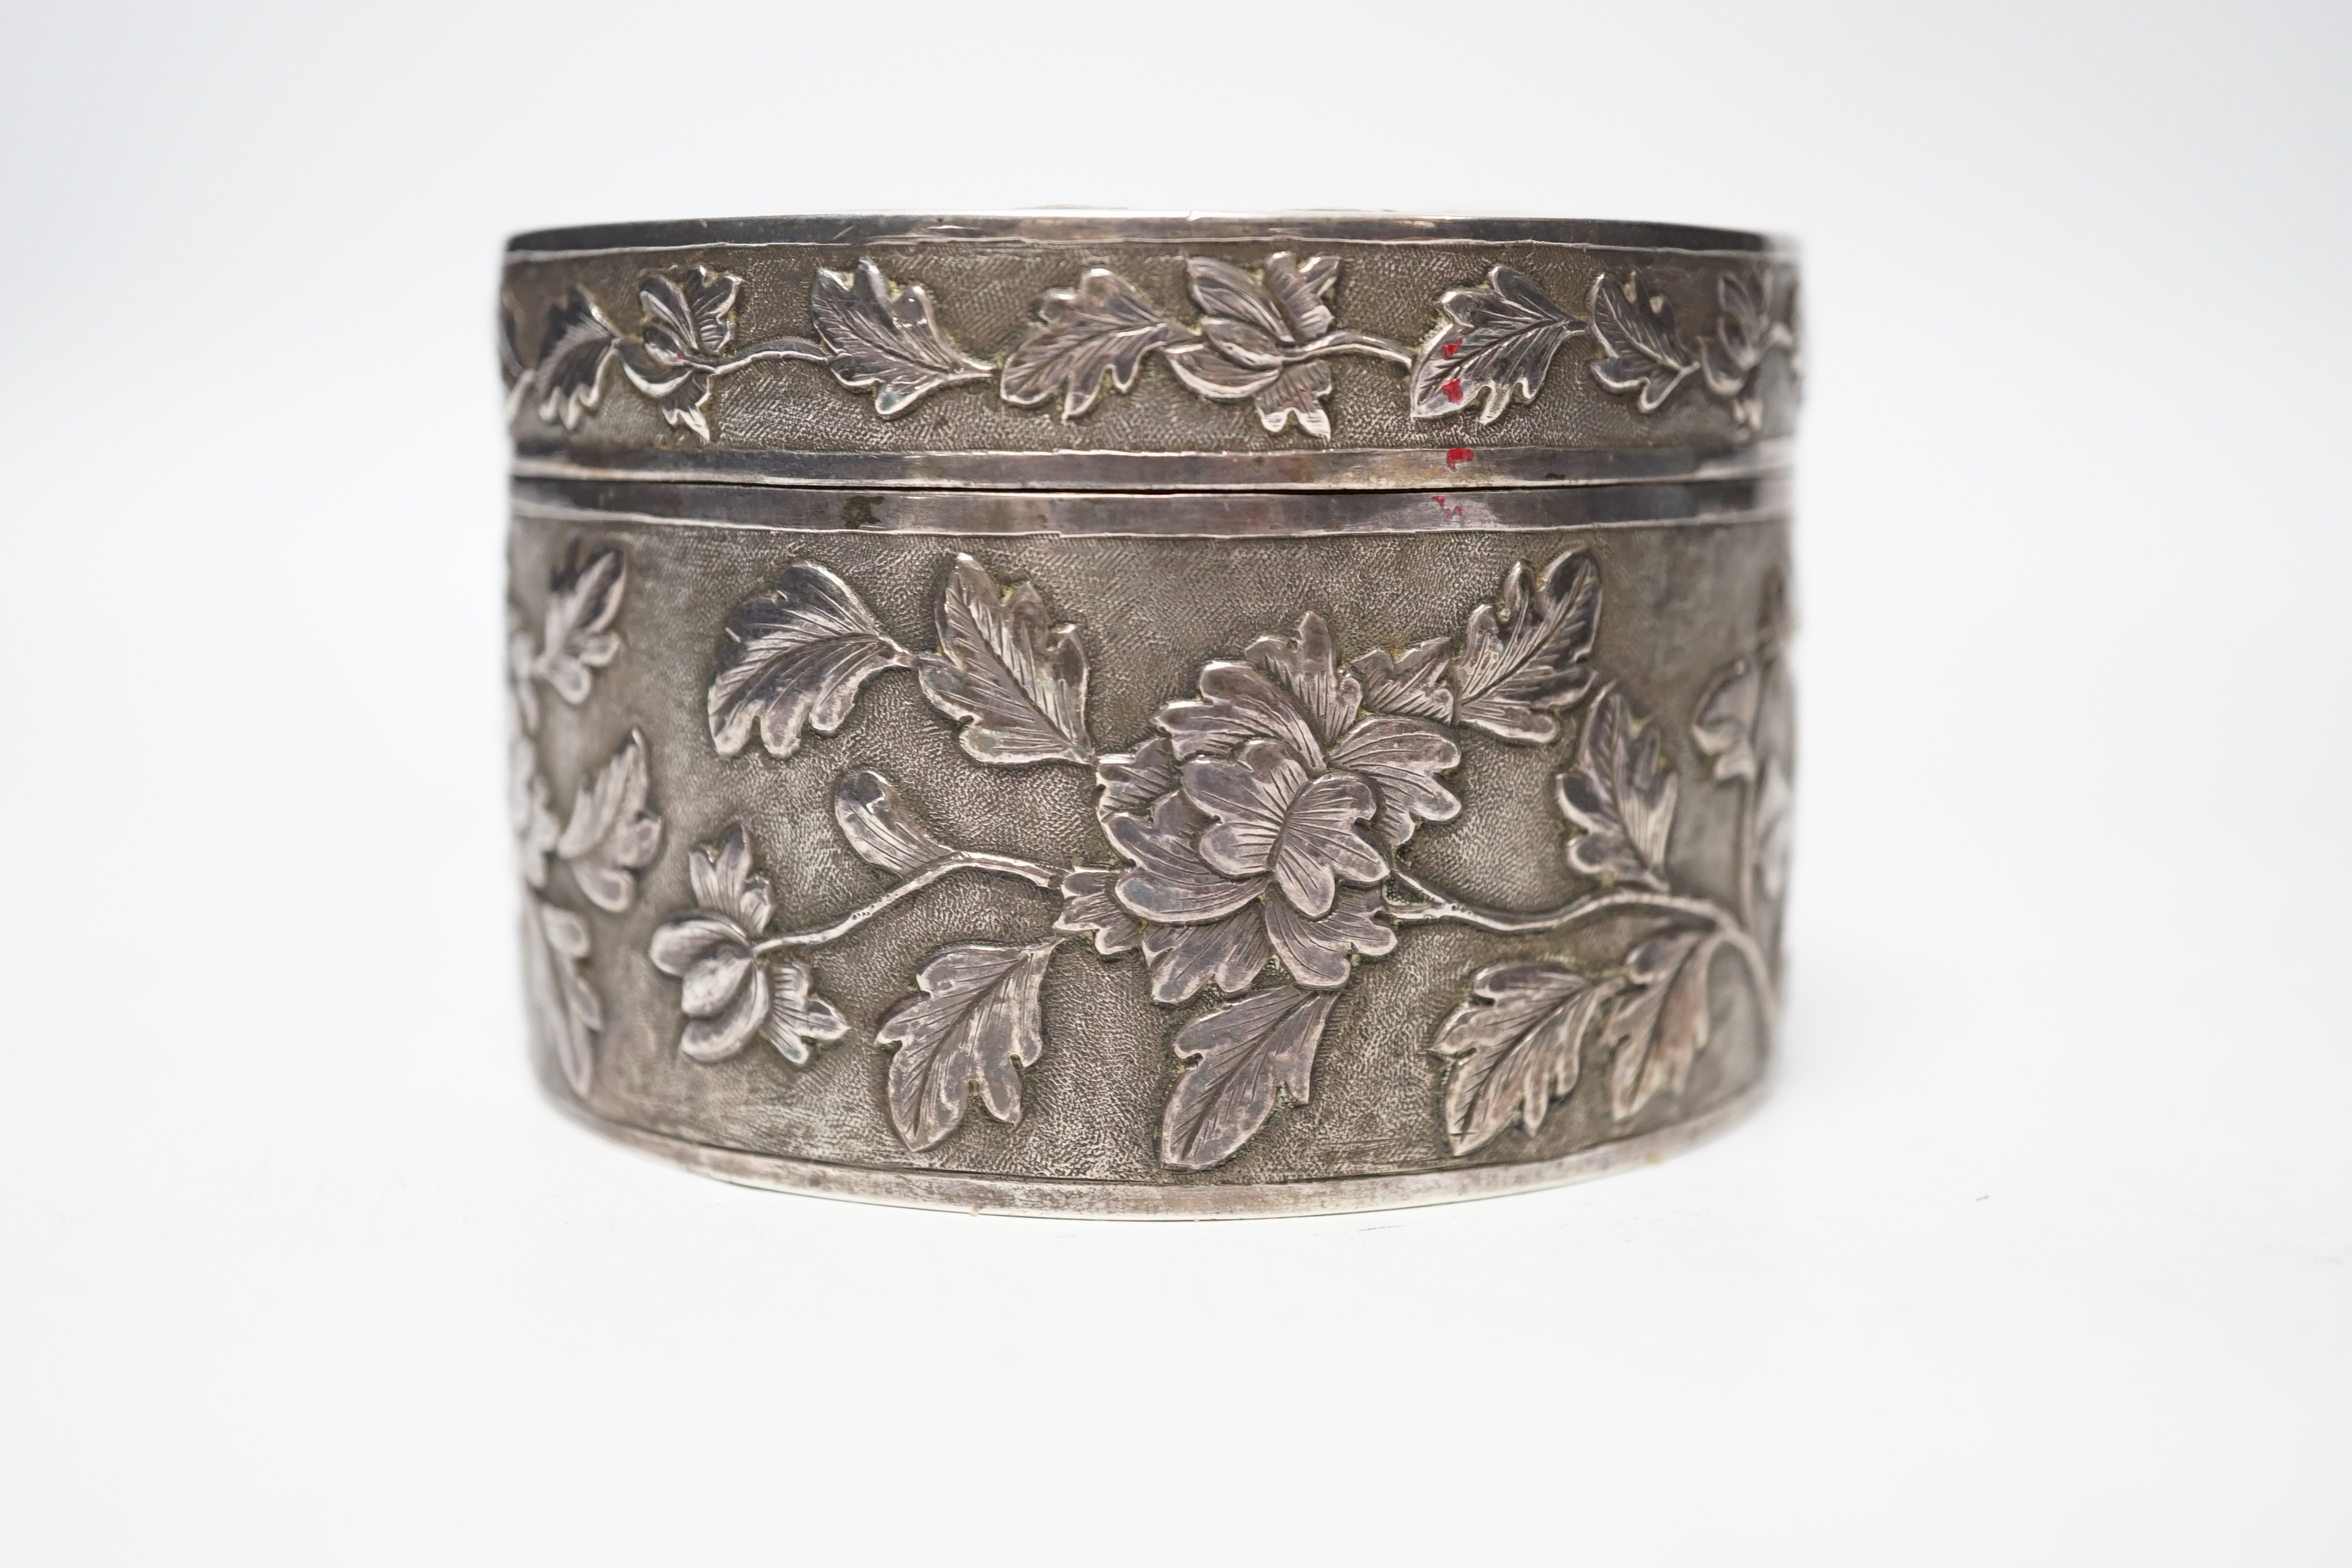 An early 20th century Chinese white metal circular box and cover, maker's mark MK, with foliate decoration and engraved inscription, diameter 82mm, 128 grams.